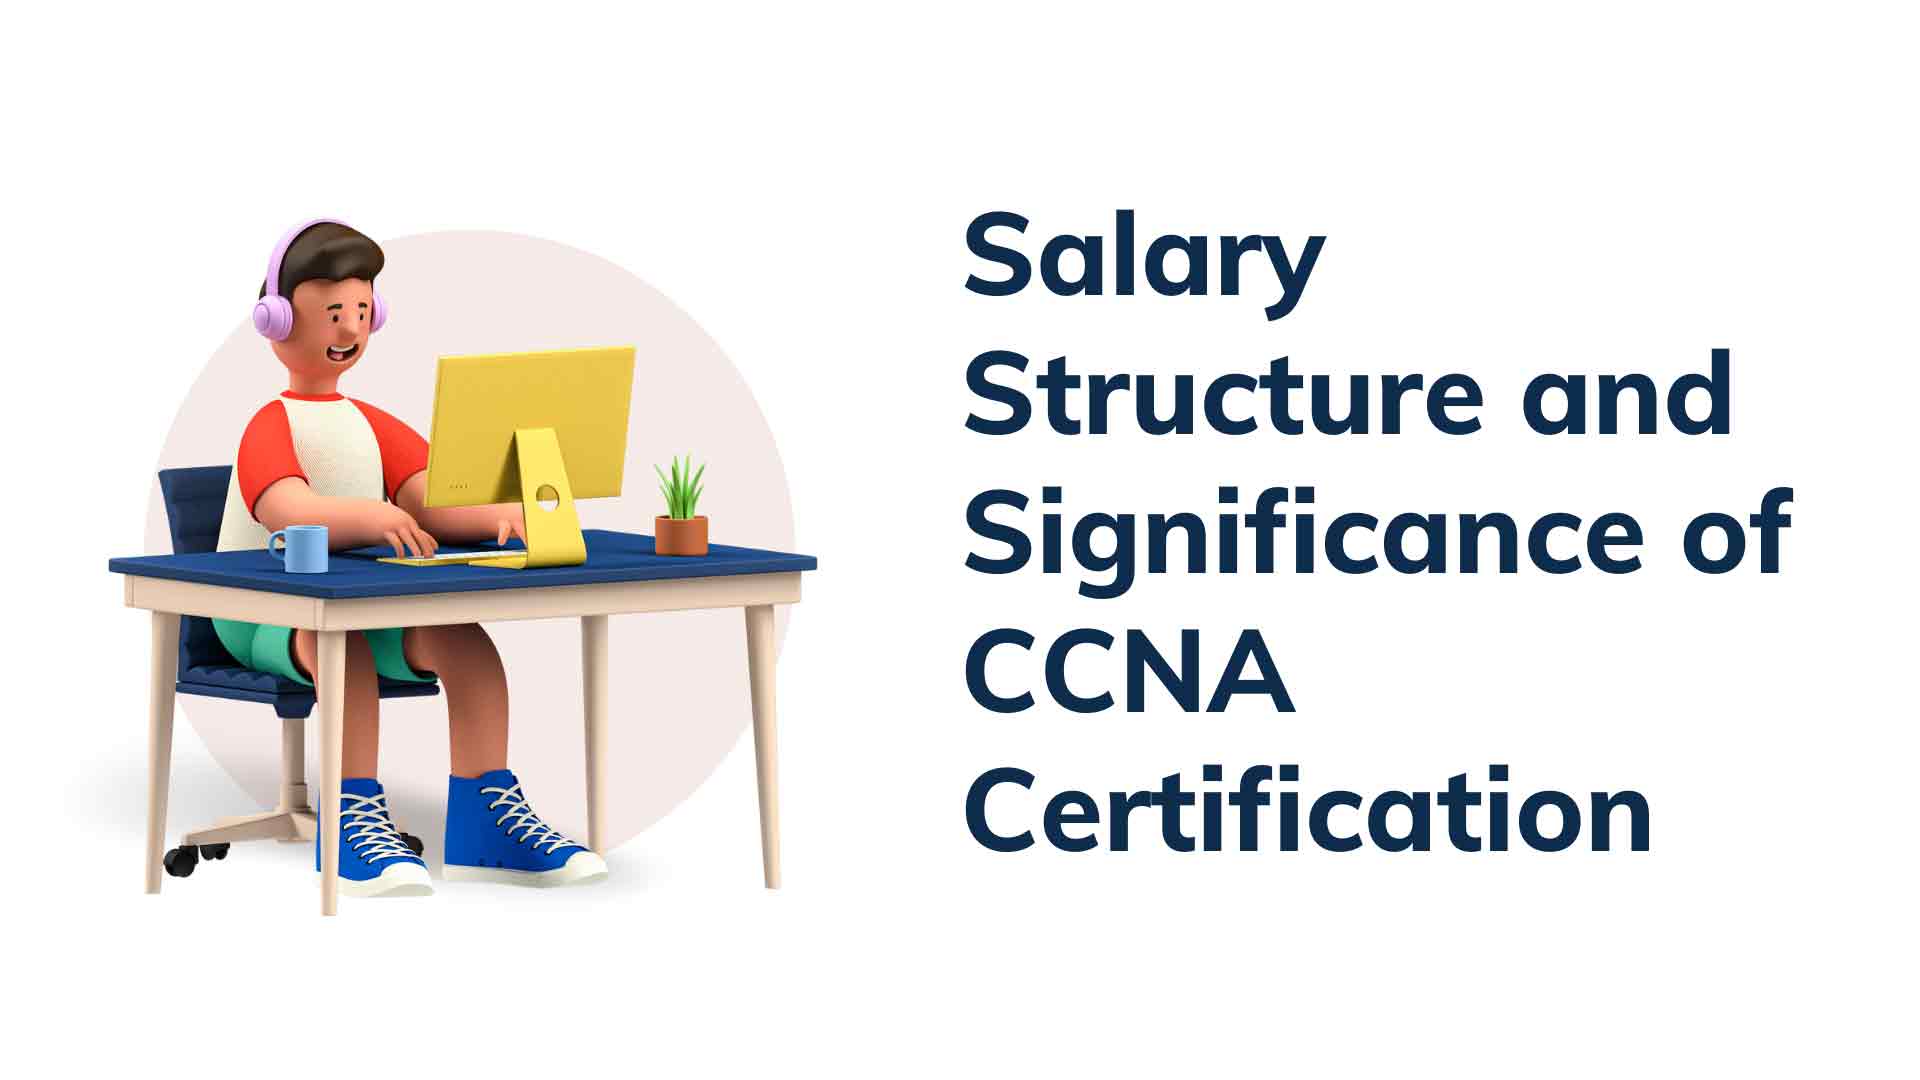 Understanding the Salary Structure and Significance of CCNA Certification